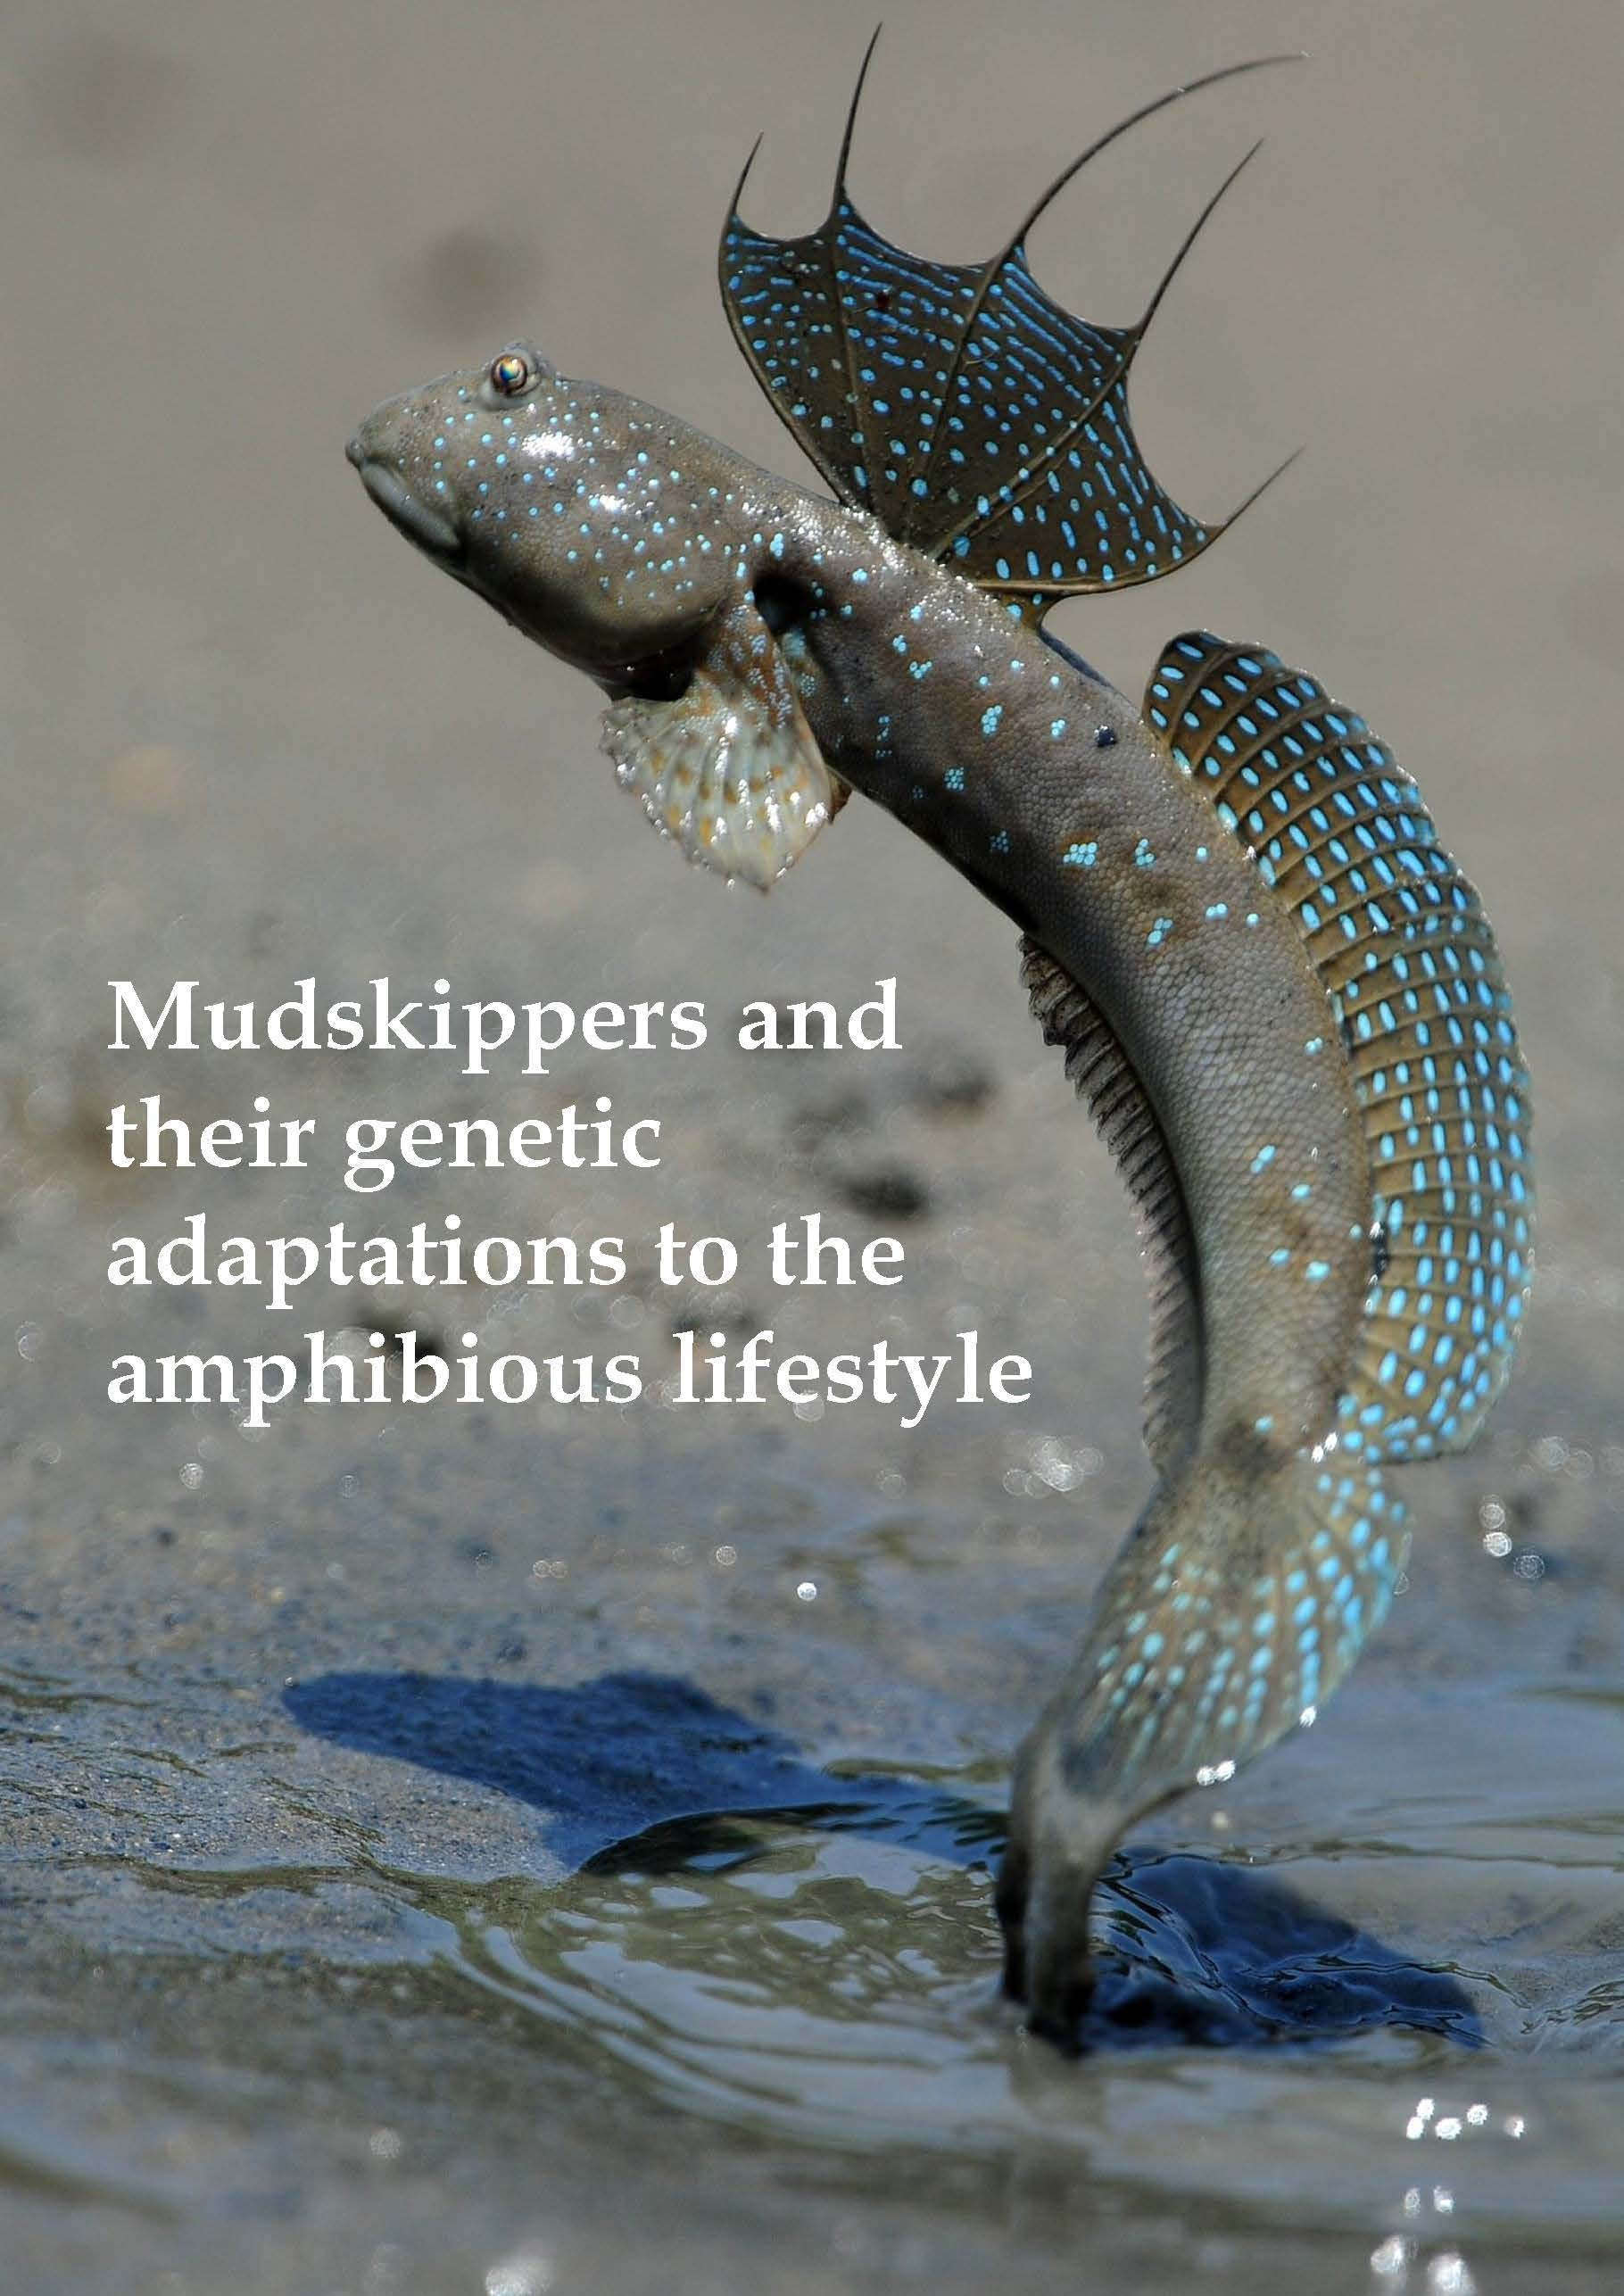 Animals | Free Full-Text | Mudskippers and Their Genetic Adaptations to an  Amphibious Lifestyle